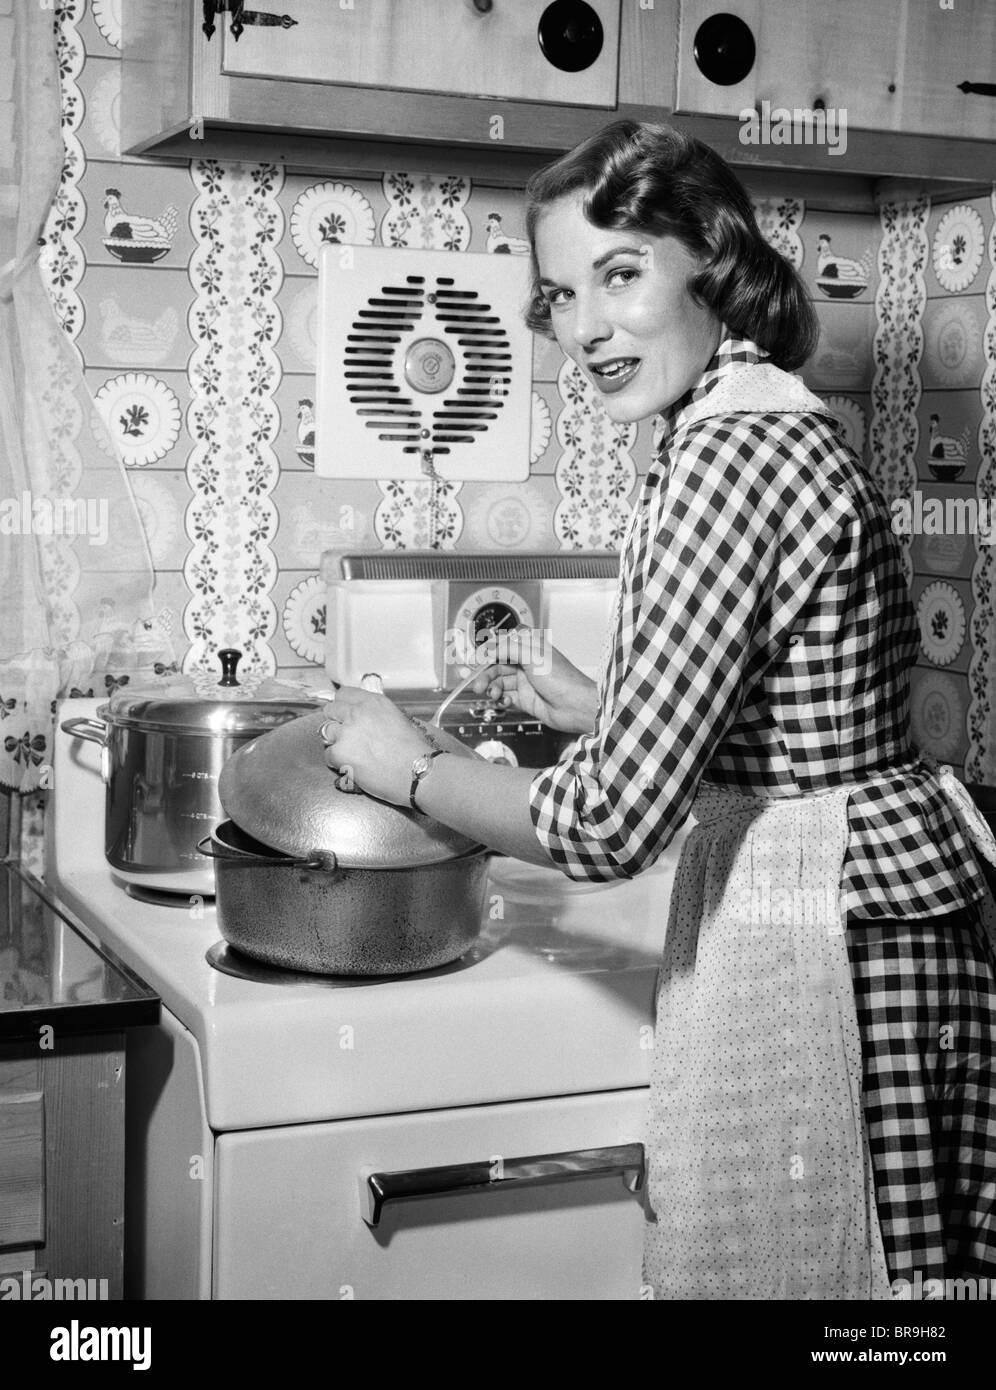 1950s HOUSEWIFE WEARING CHECKERED DRESS STANDING IN KITCHEN STIRRING POT ON STOVE LOOKING OVER SHOULDER Stock Photo